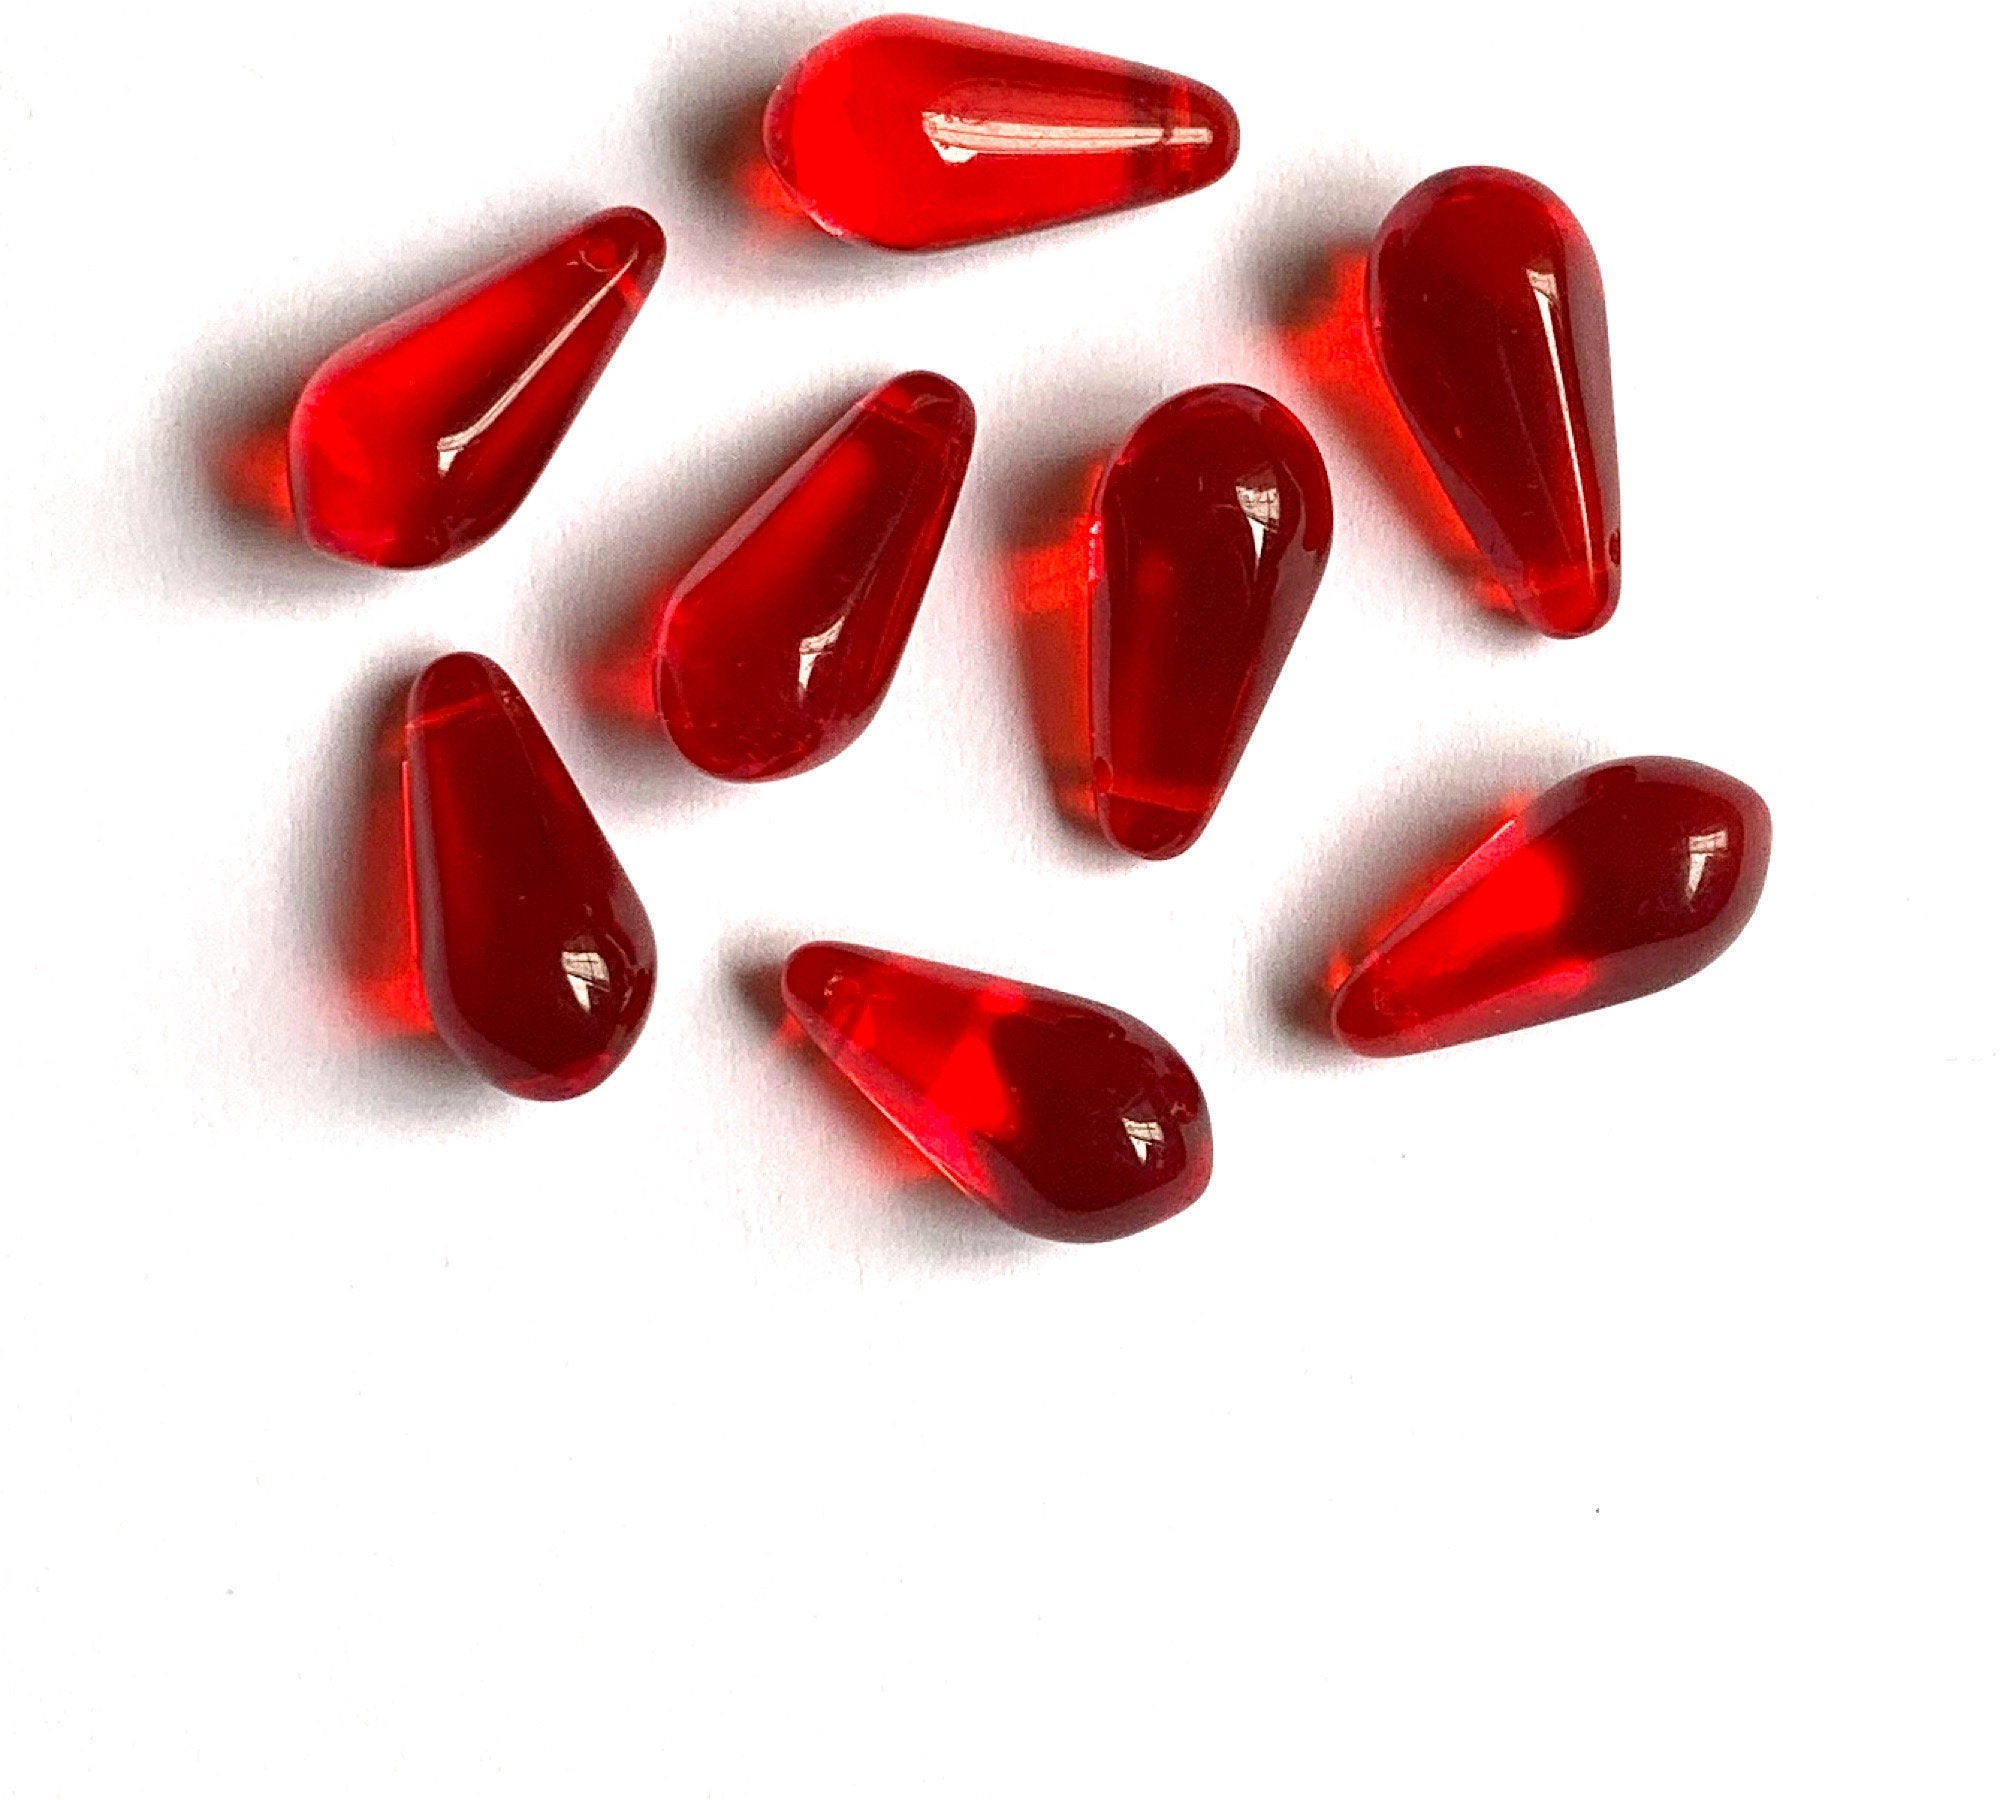 Vintage 1970s Large Holed Scarlet Red Czech Glass Beads (Mixed Sizes) (RCG5)